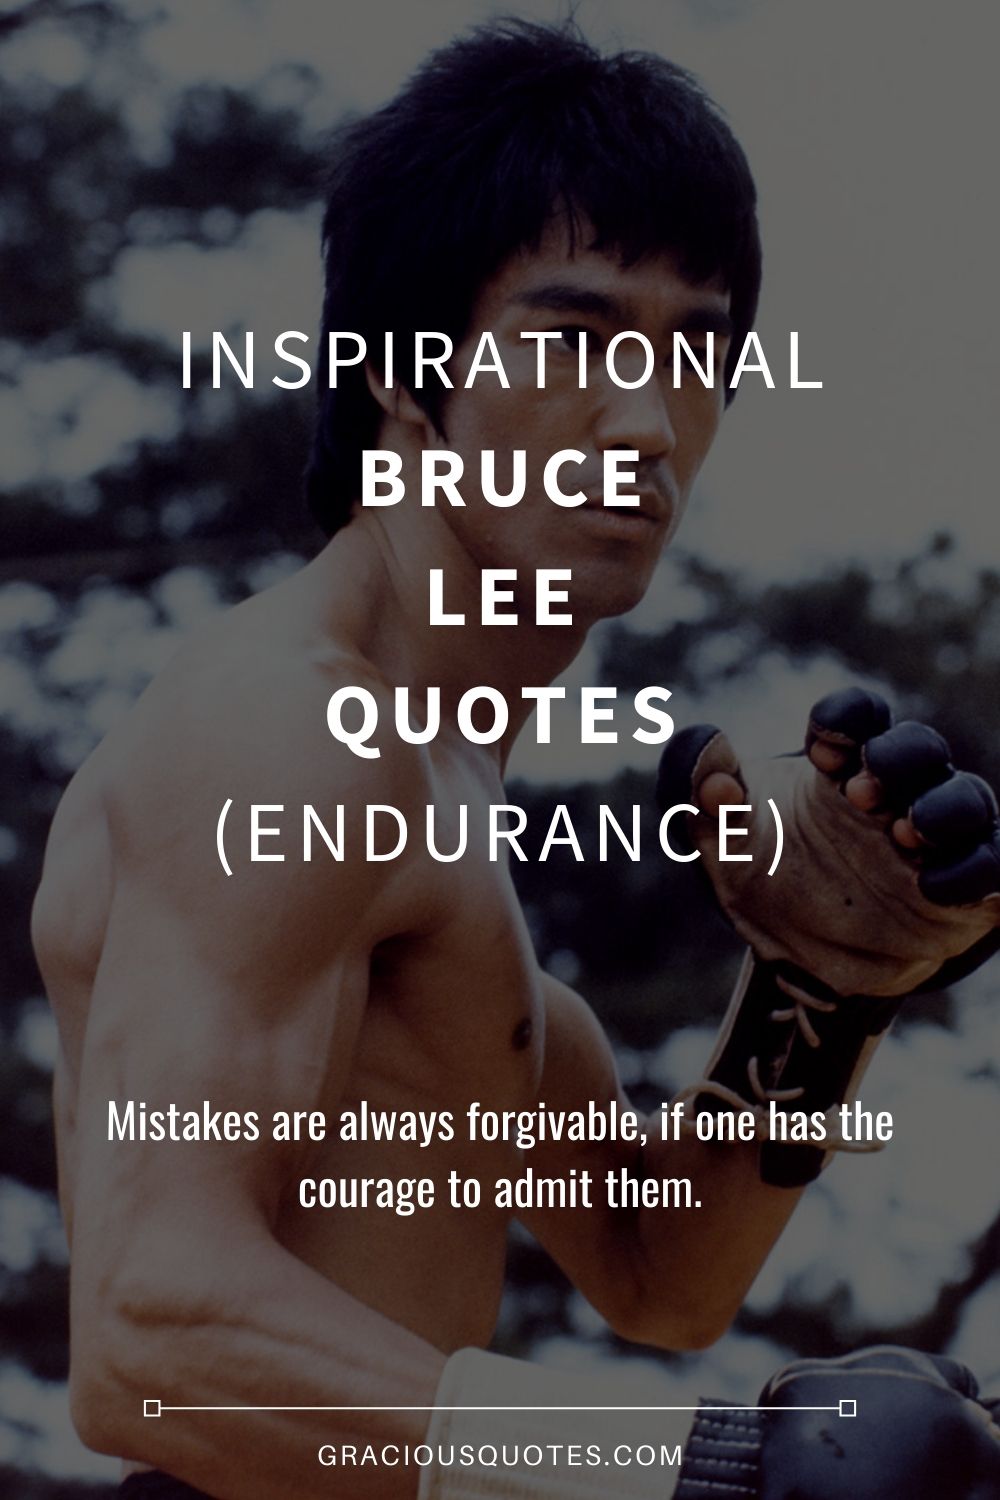 Inspirational Bruce Lee Quotes (ENDURANCE) - Gracious Quotes